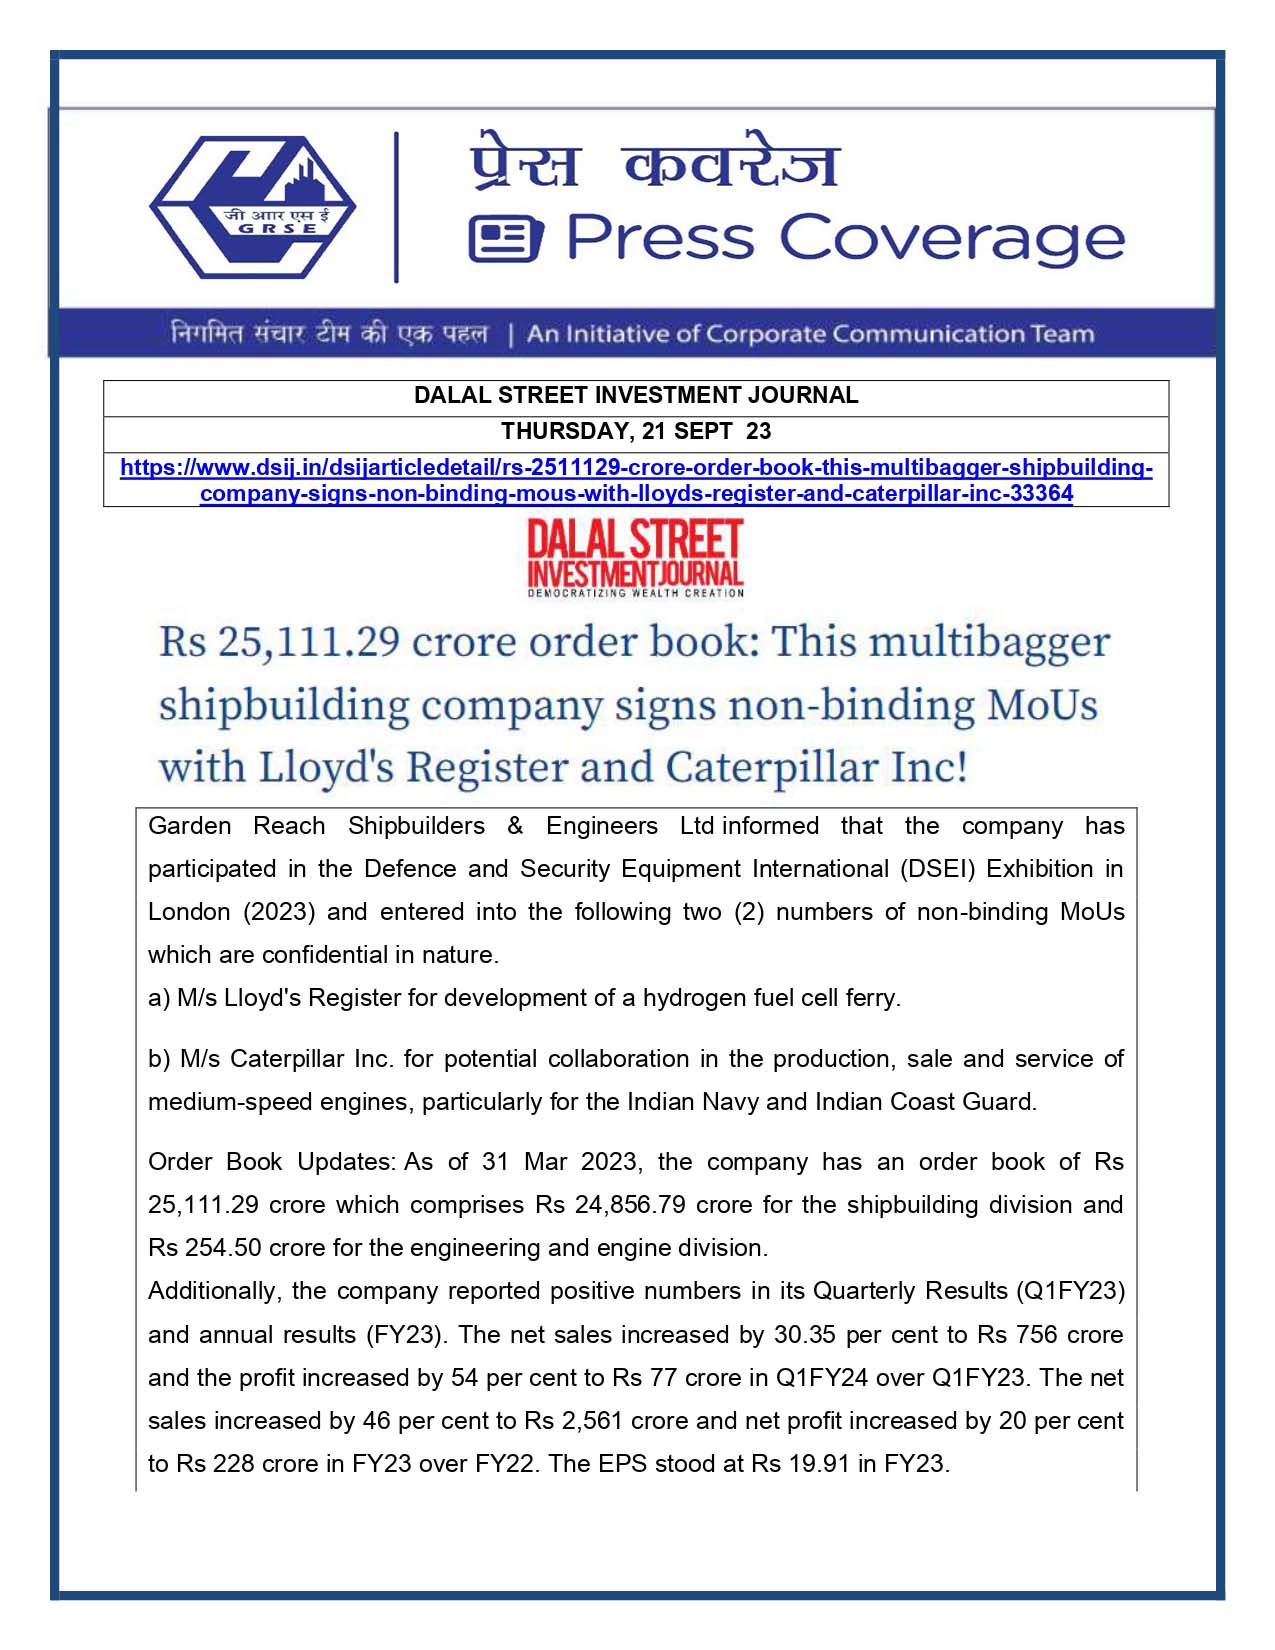 Press Coverage : Dalal Street Investment Journal, 21 Sep 23 : Rs 25,111.29 Crore : This multibagger shipbuilding company signs non-binding MoUs with LLoyd' Register and Caterpiller Inc